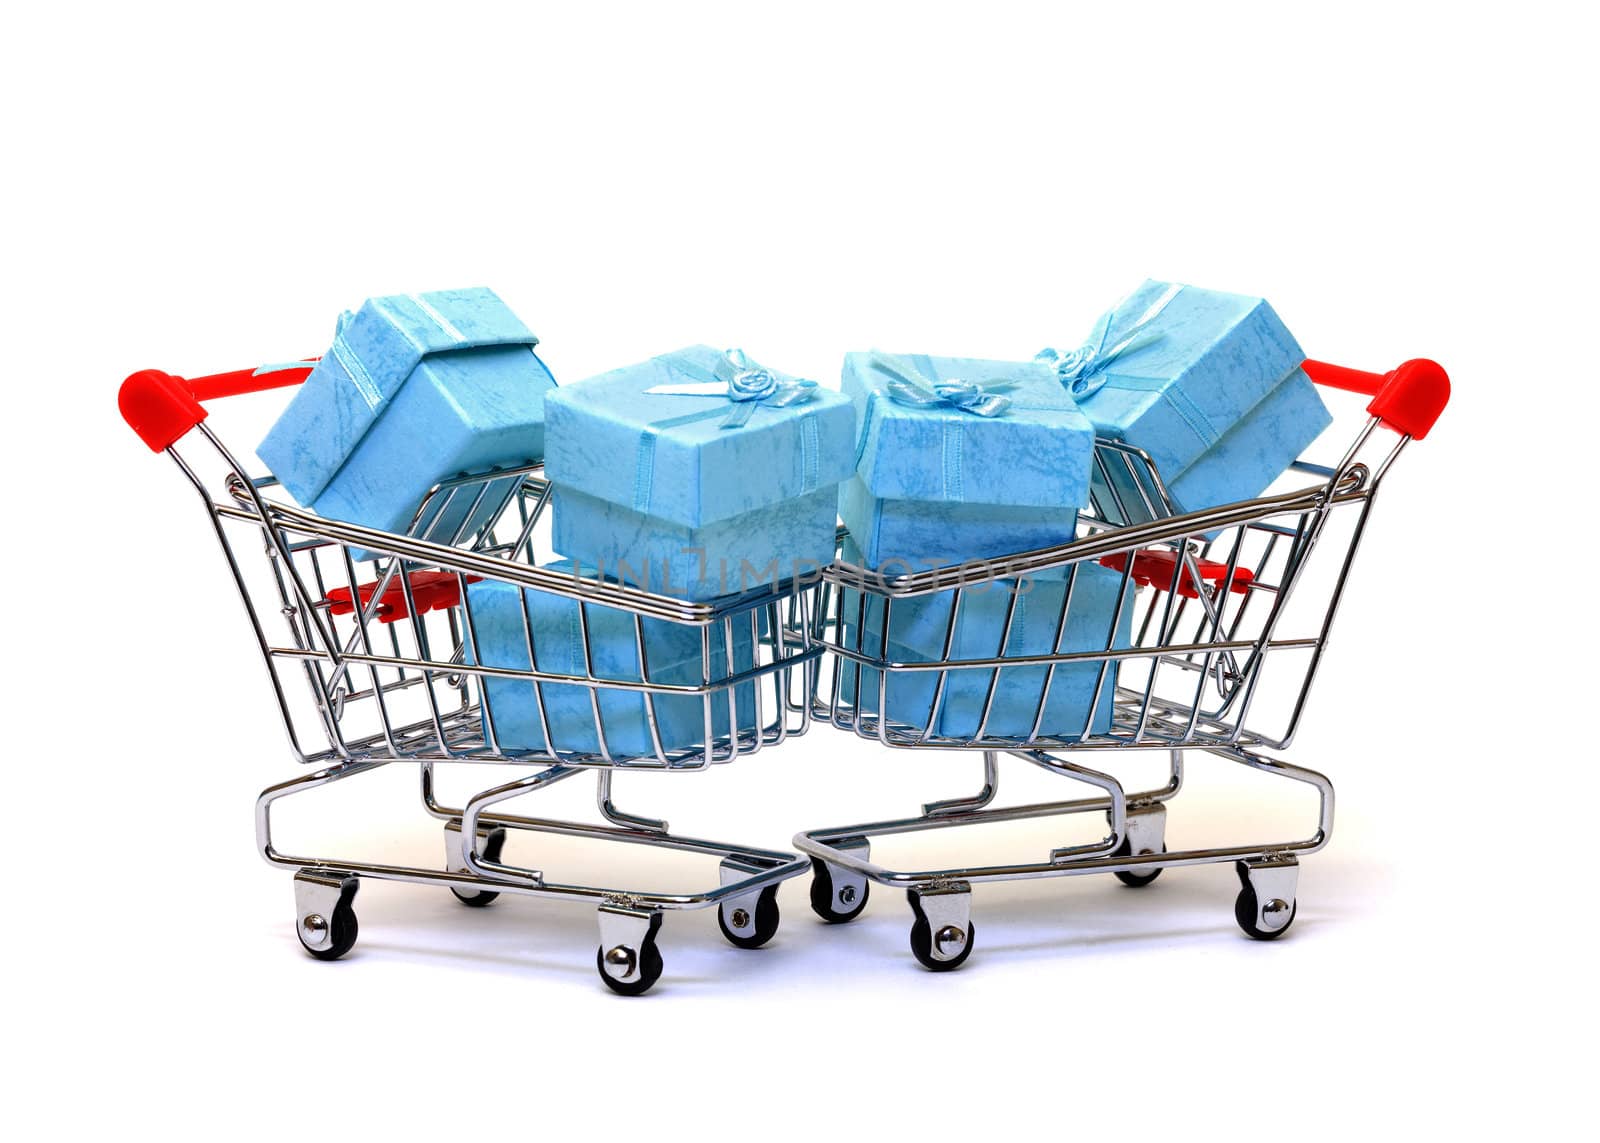 Cyan gift boxes in shopping carts by Discovod